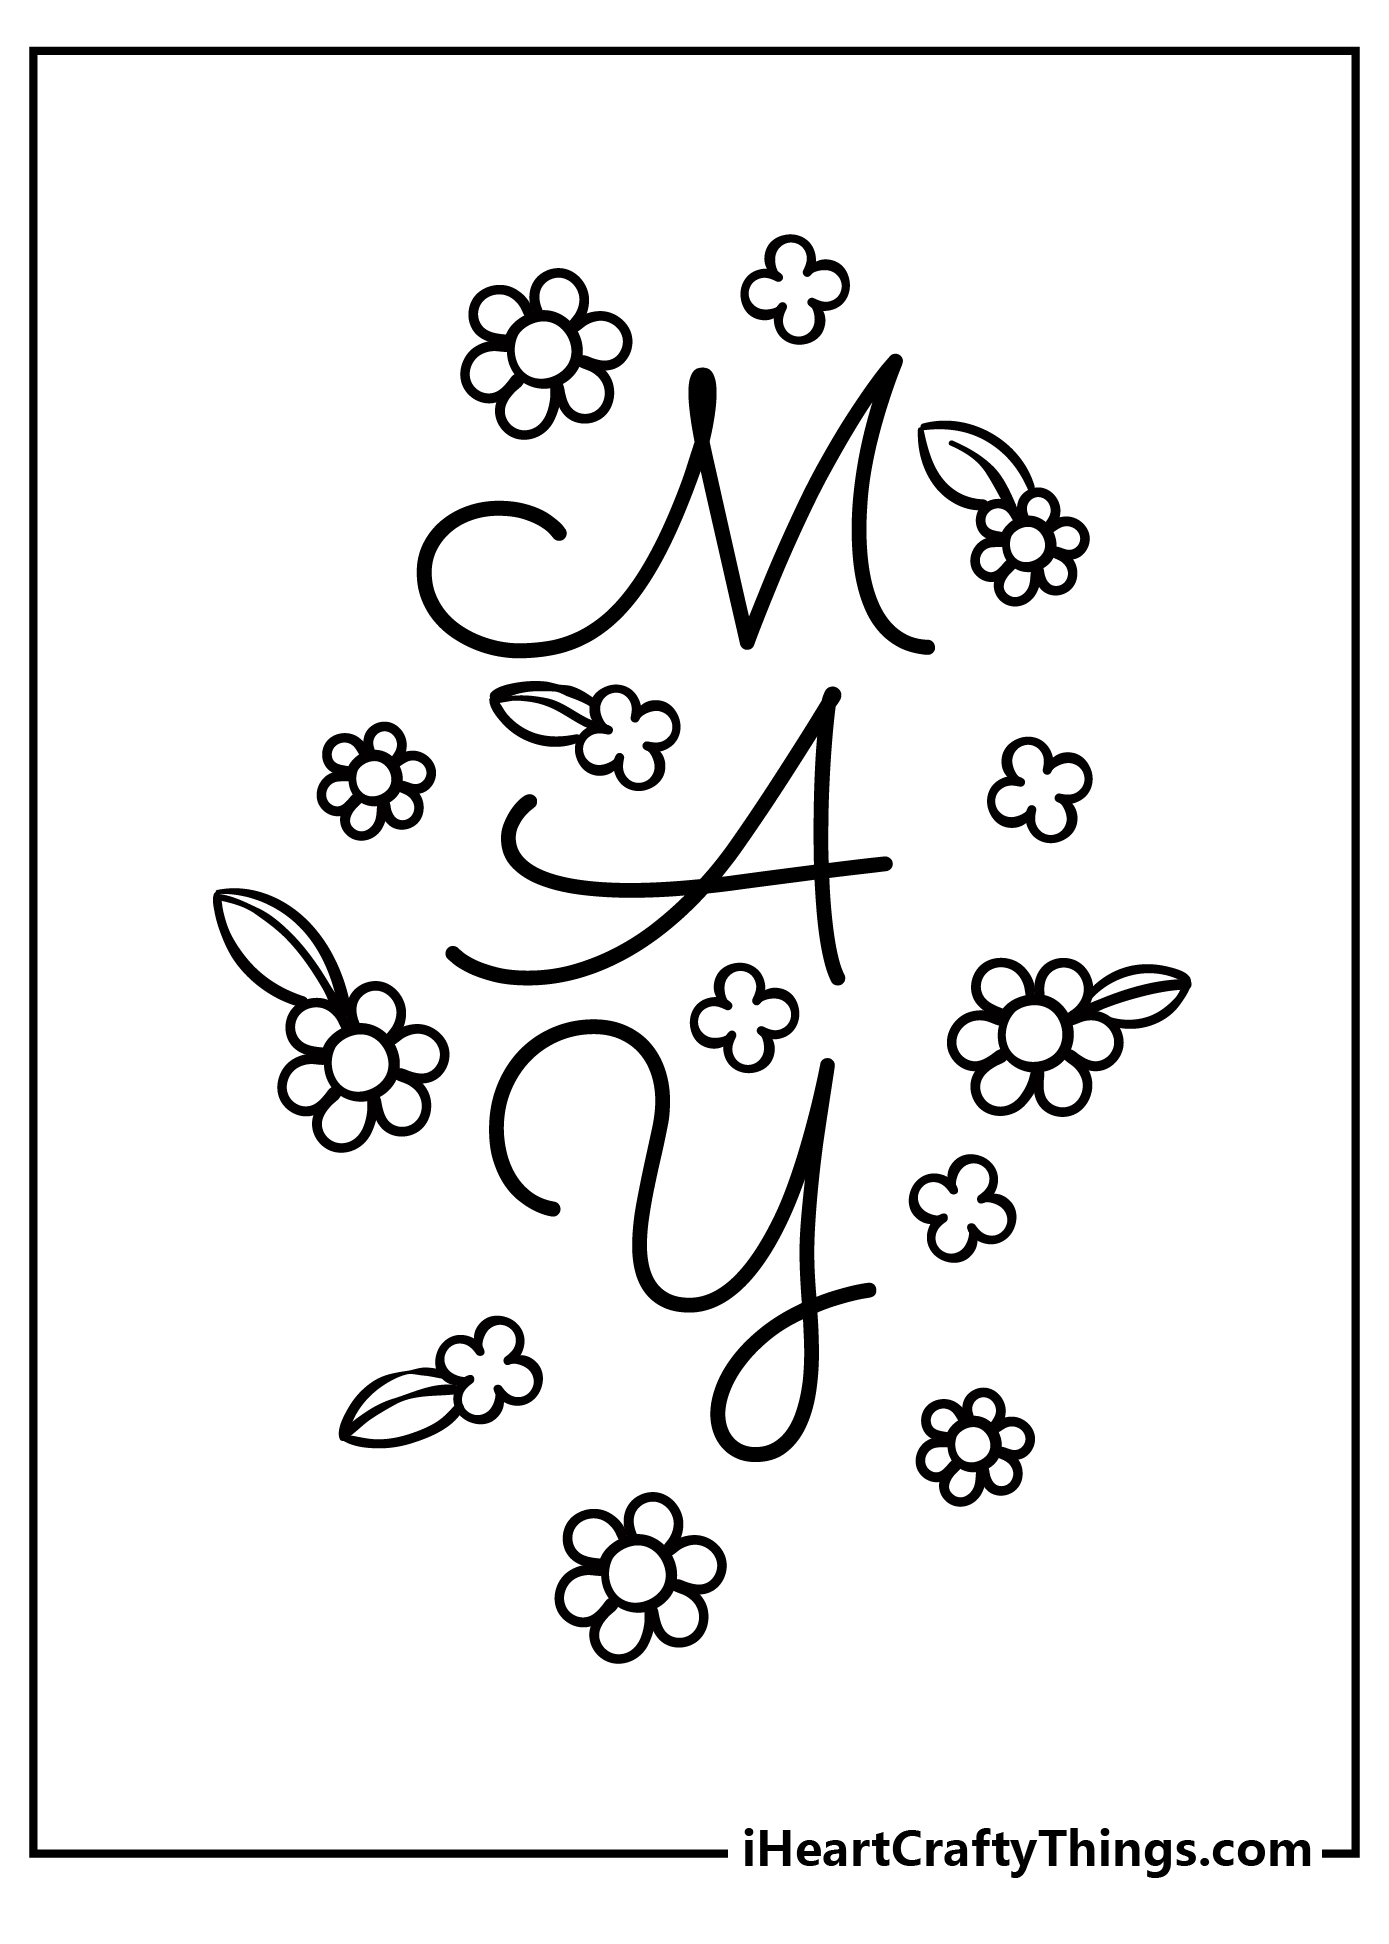 May Coloring Pages free pdf download